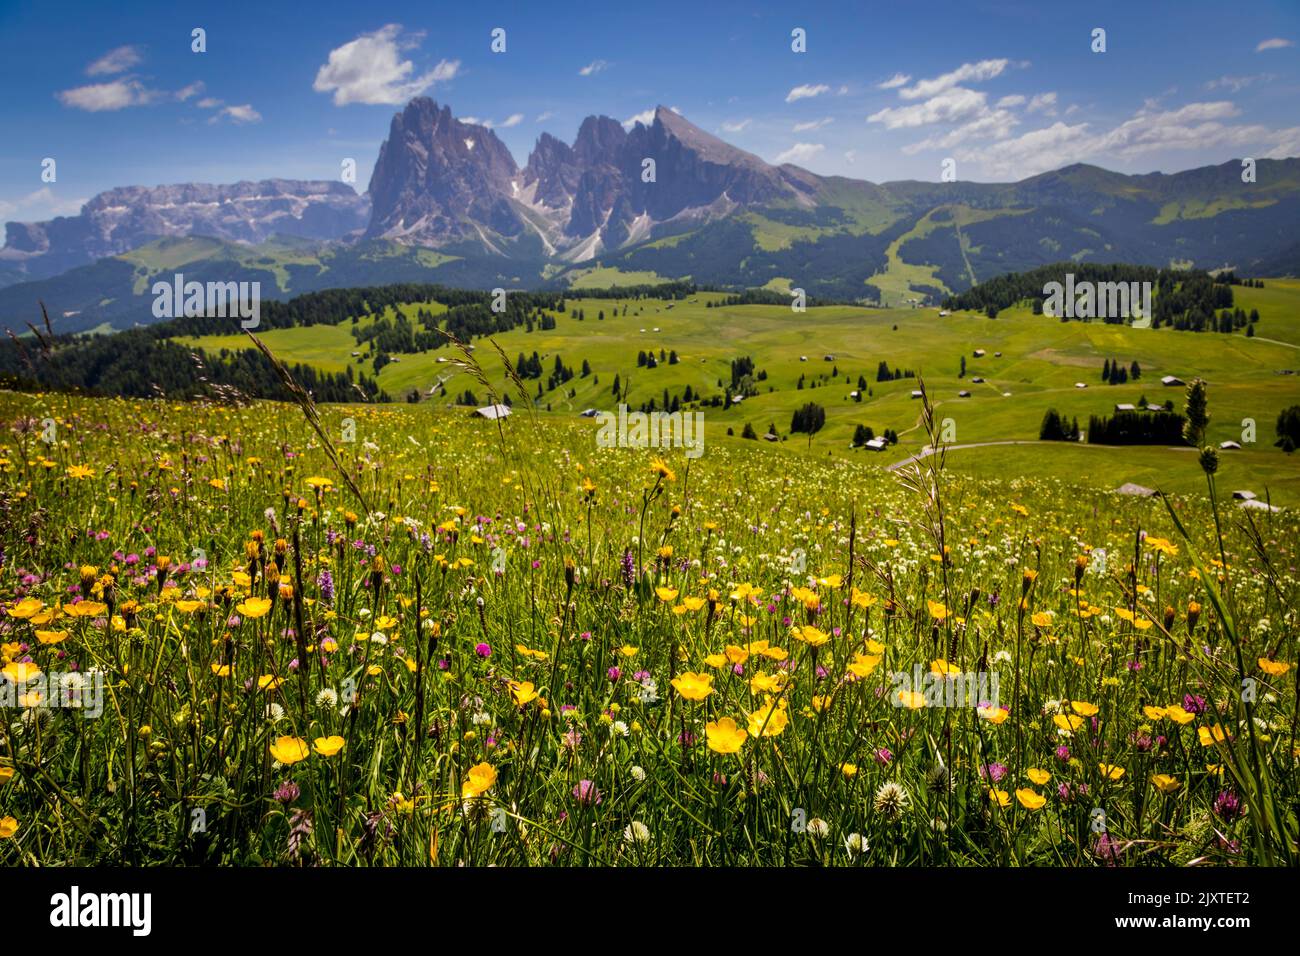 Buttercups and other wild flowers fill the alpine meadow of the Alpi di Siusi, in the Italian Dolomites. Stock Photo